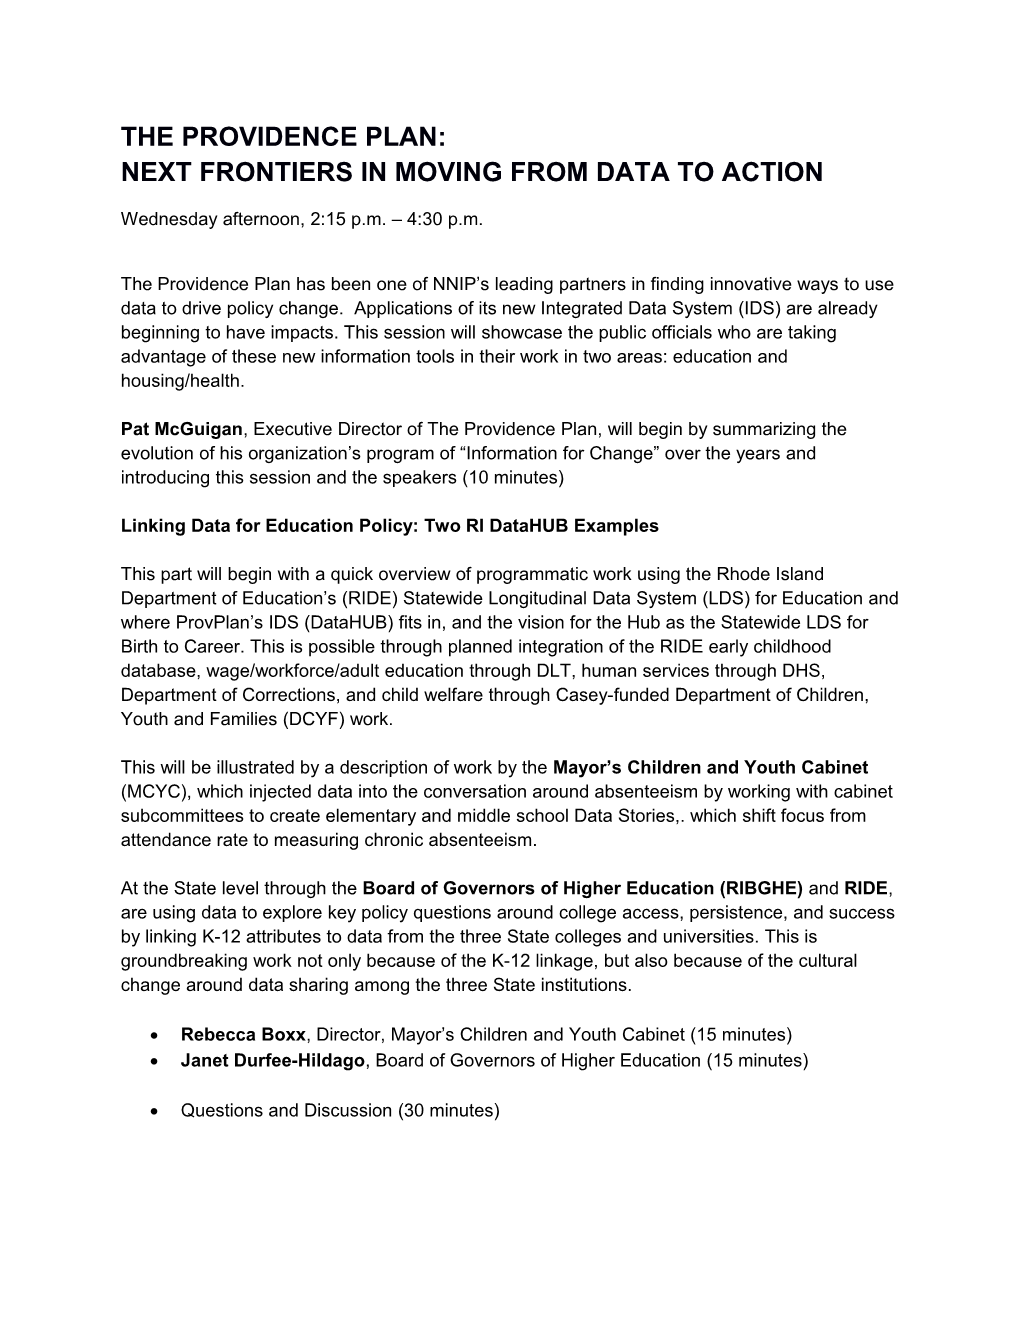 Next Frontiers in Moving from Data to Action